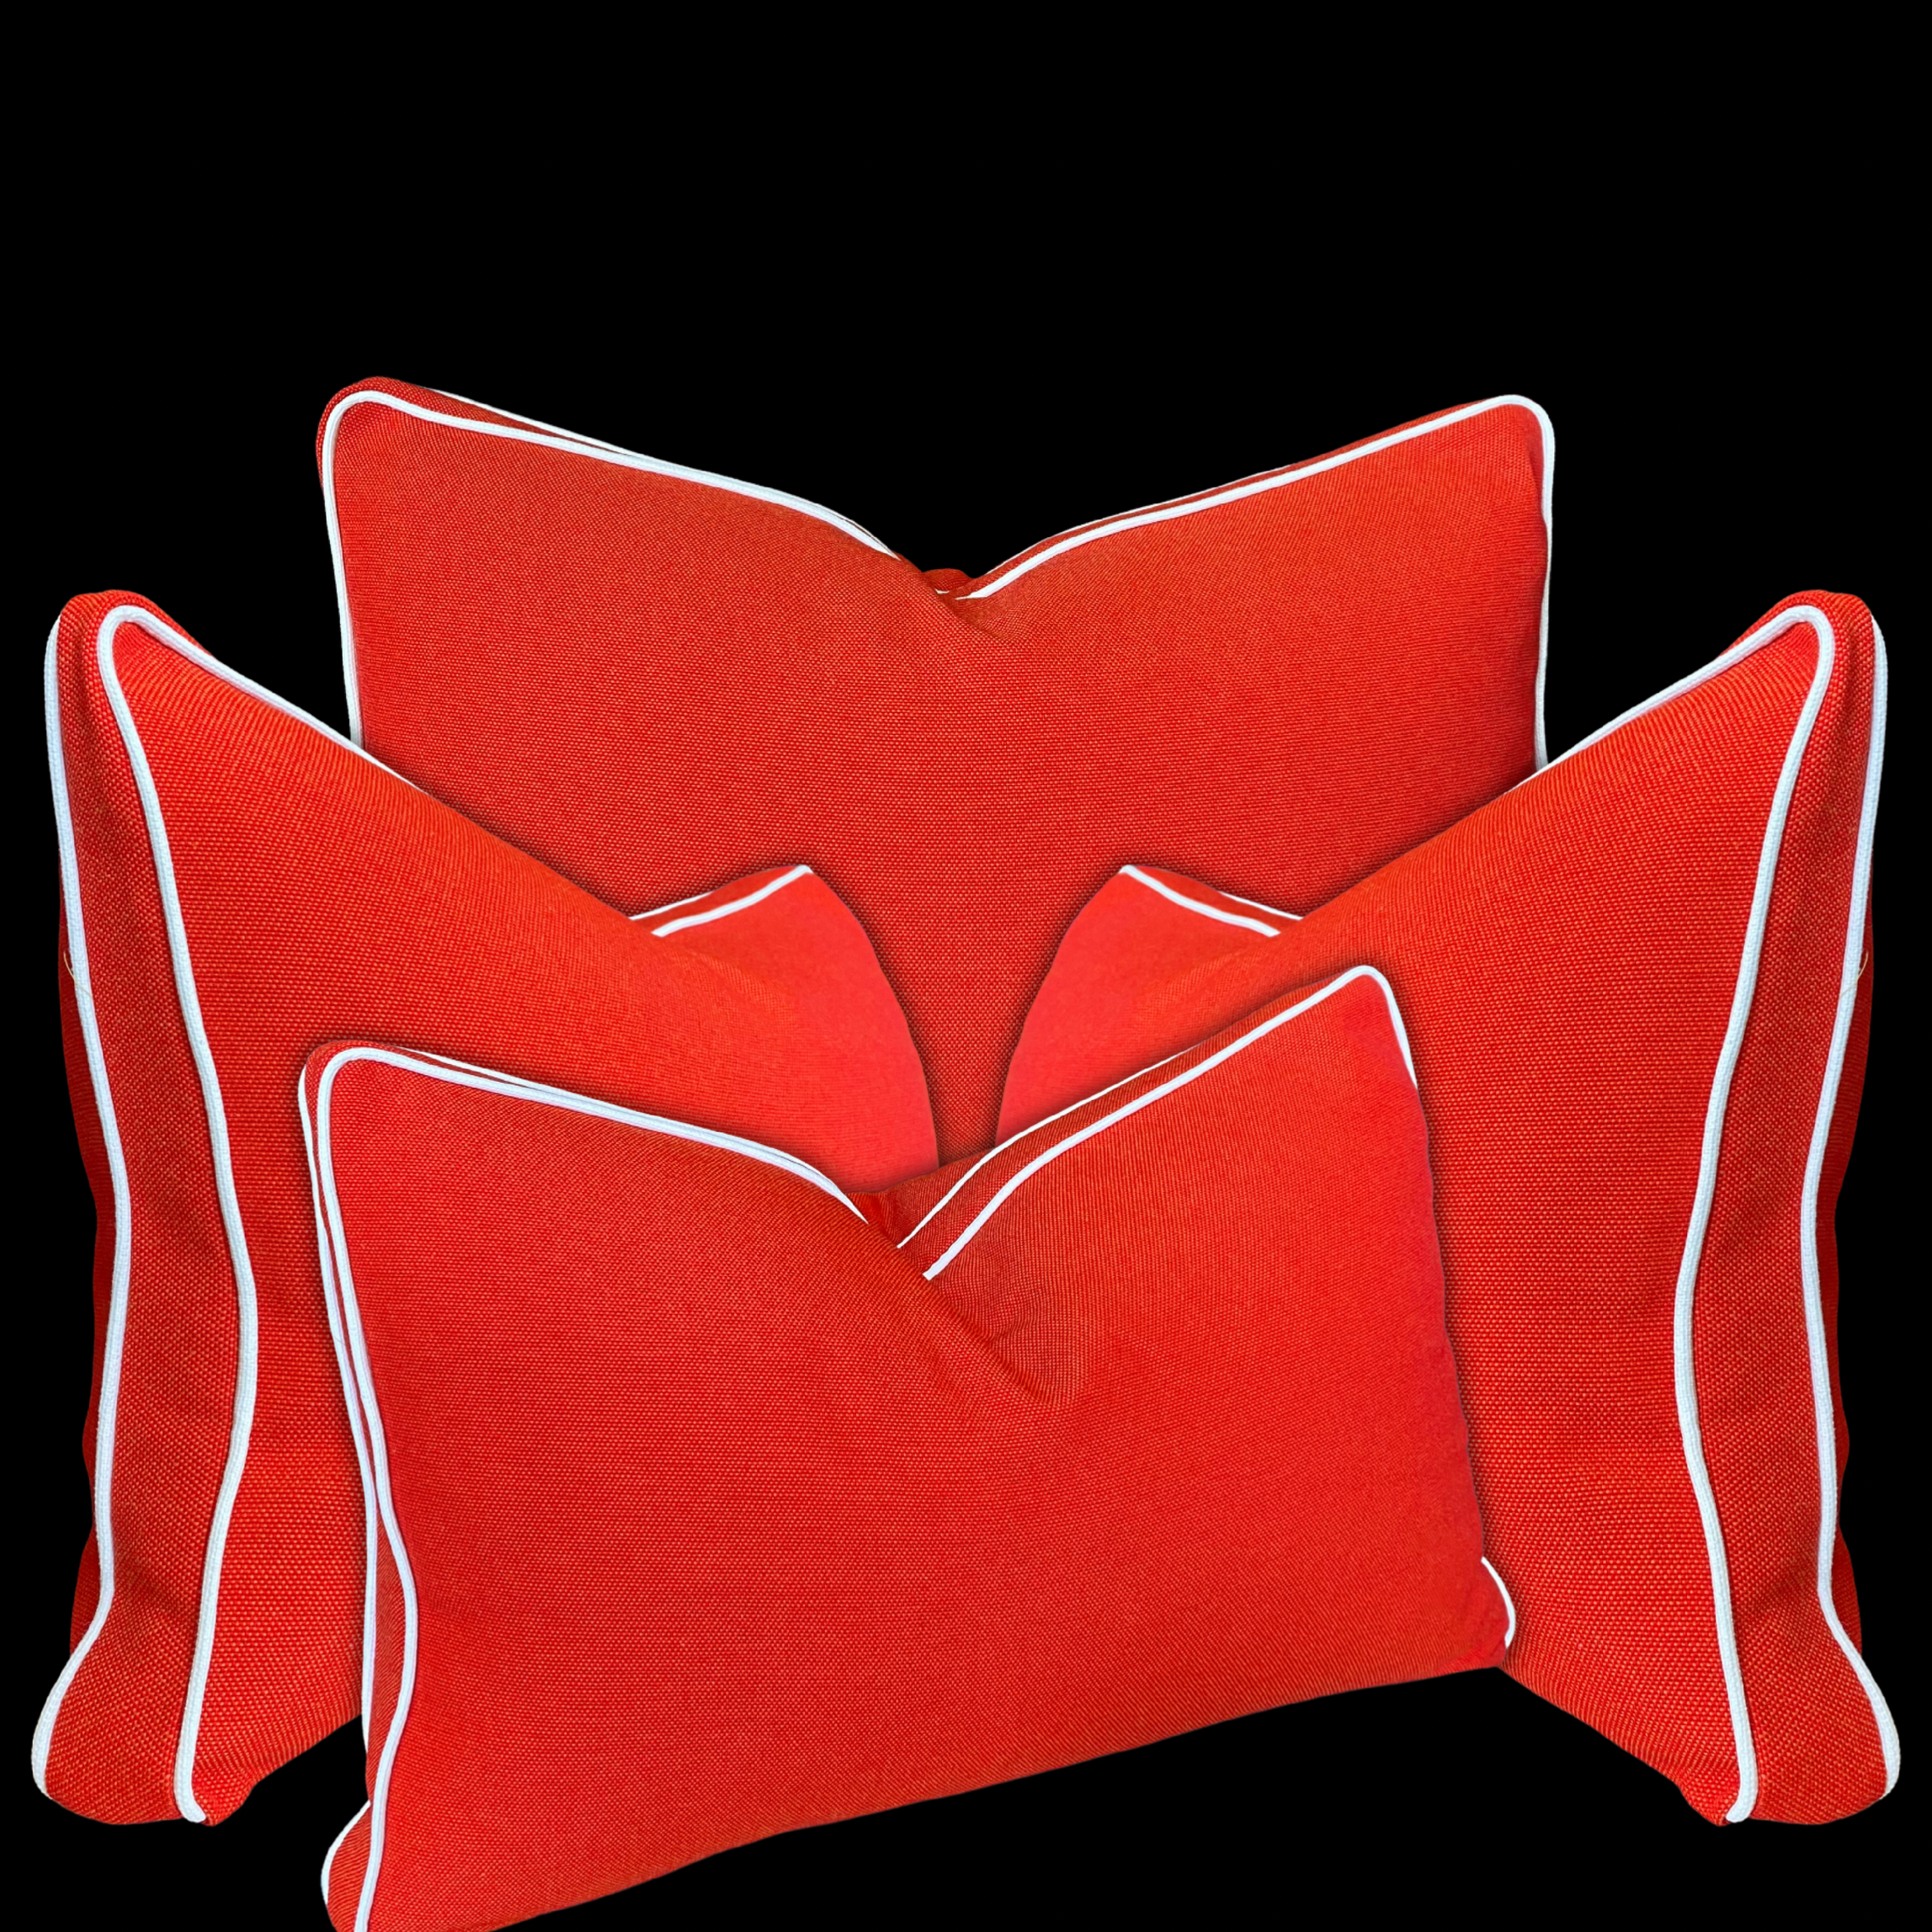 Red Upholstery Fabric